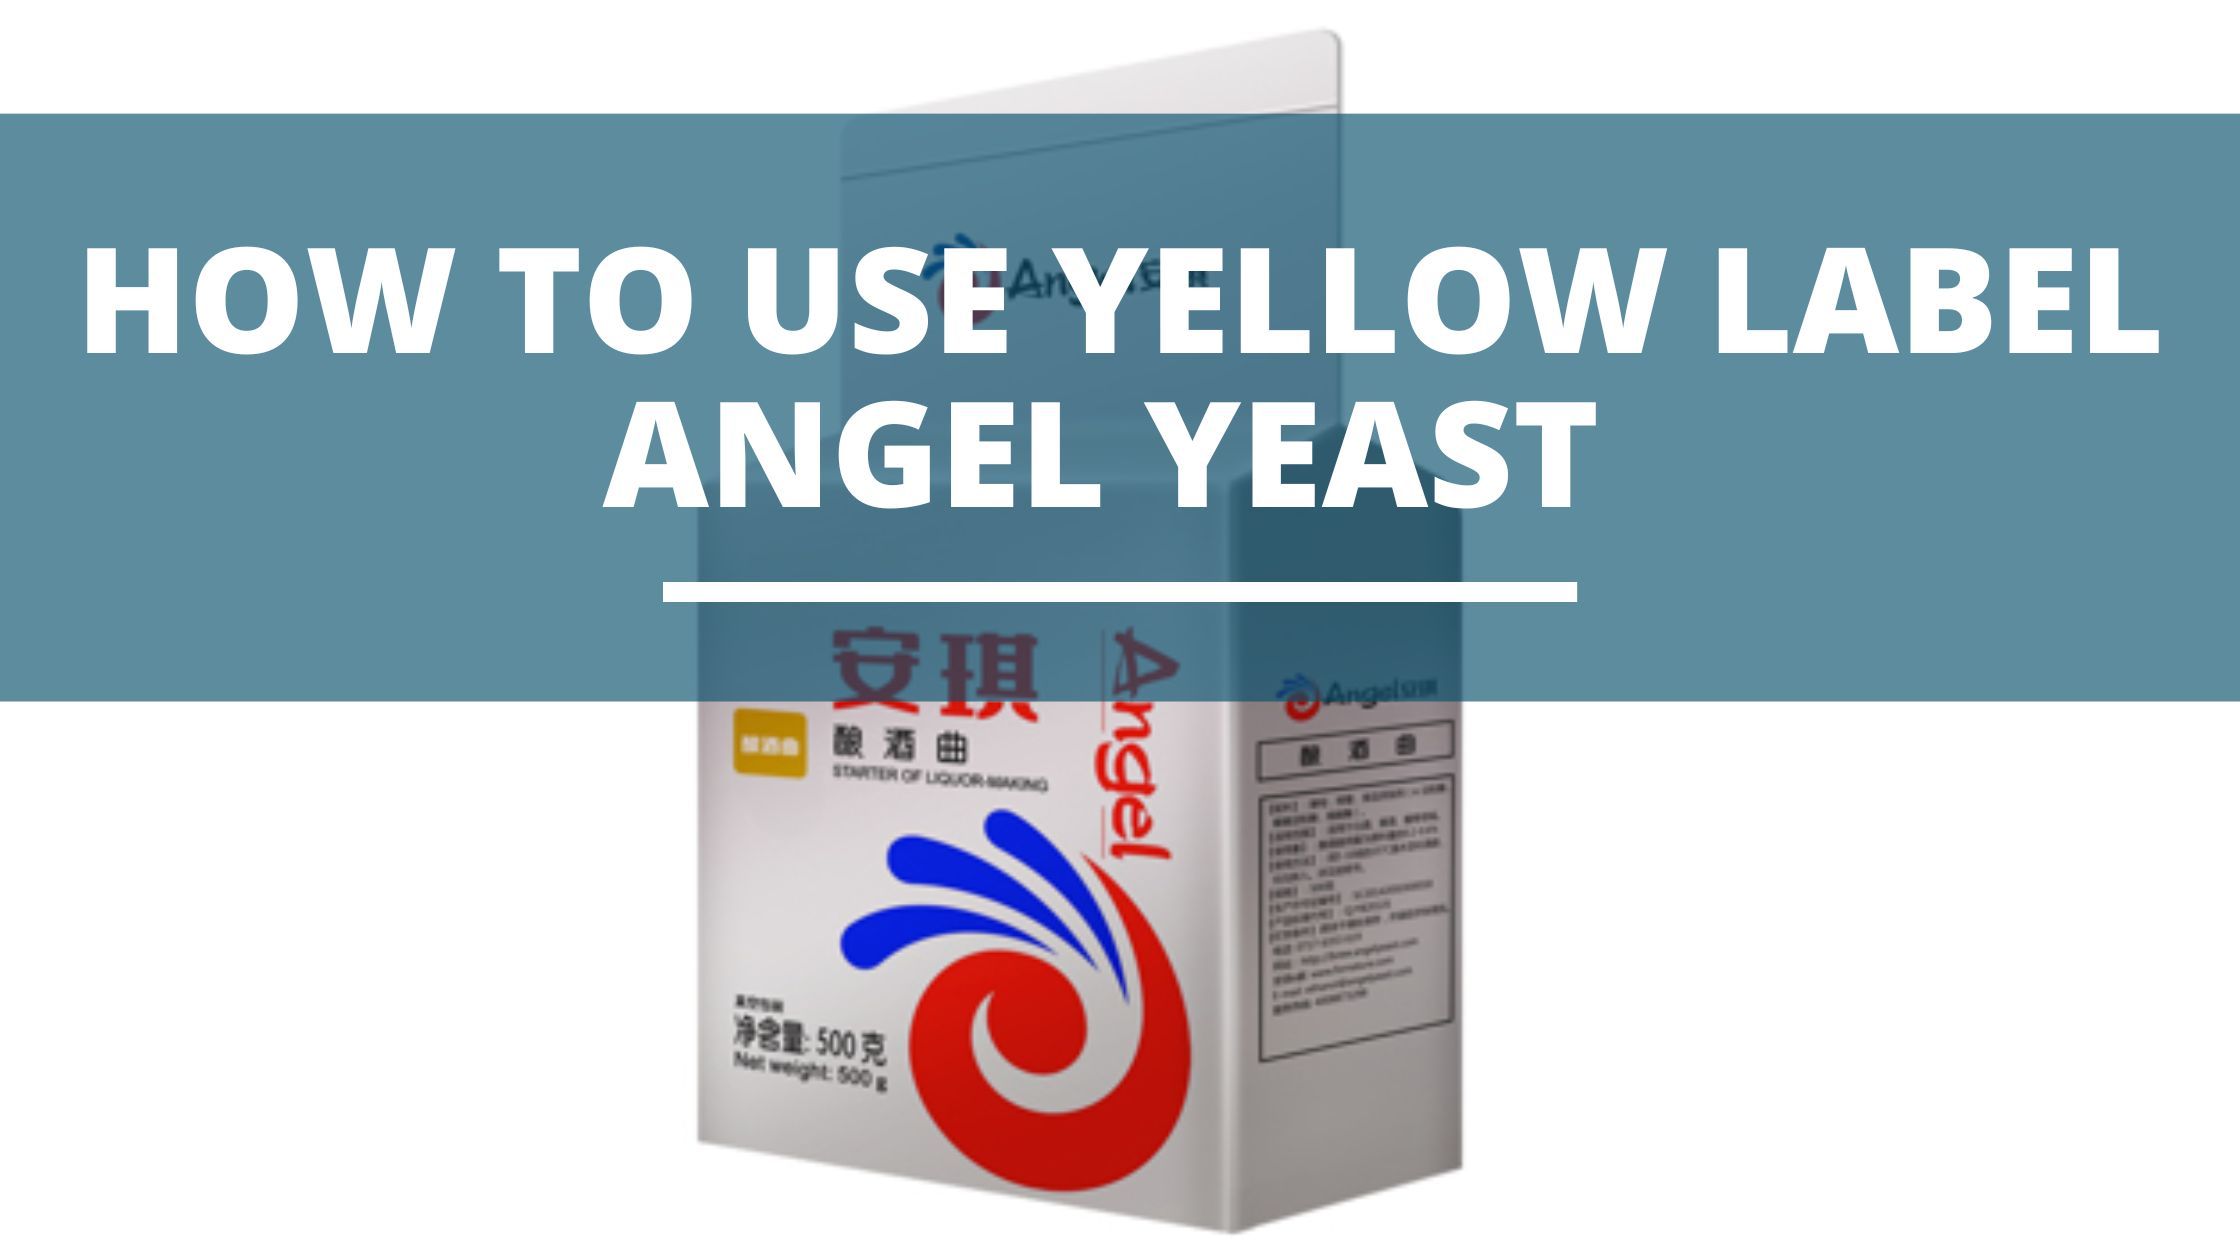 Yellow label angel yeast (a distiller’s guide to angel leaven)